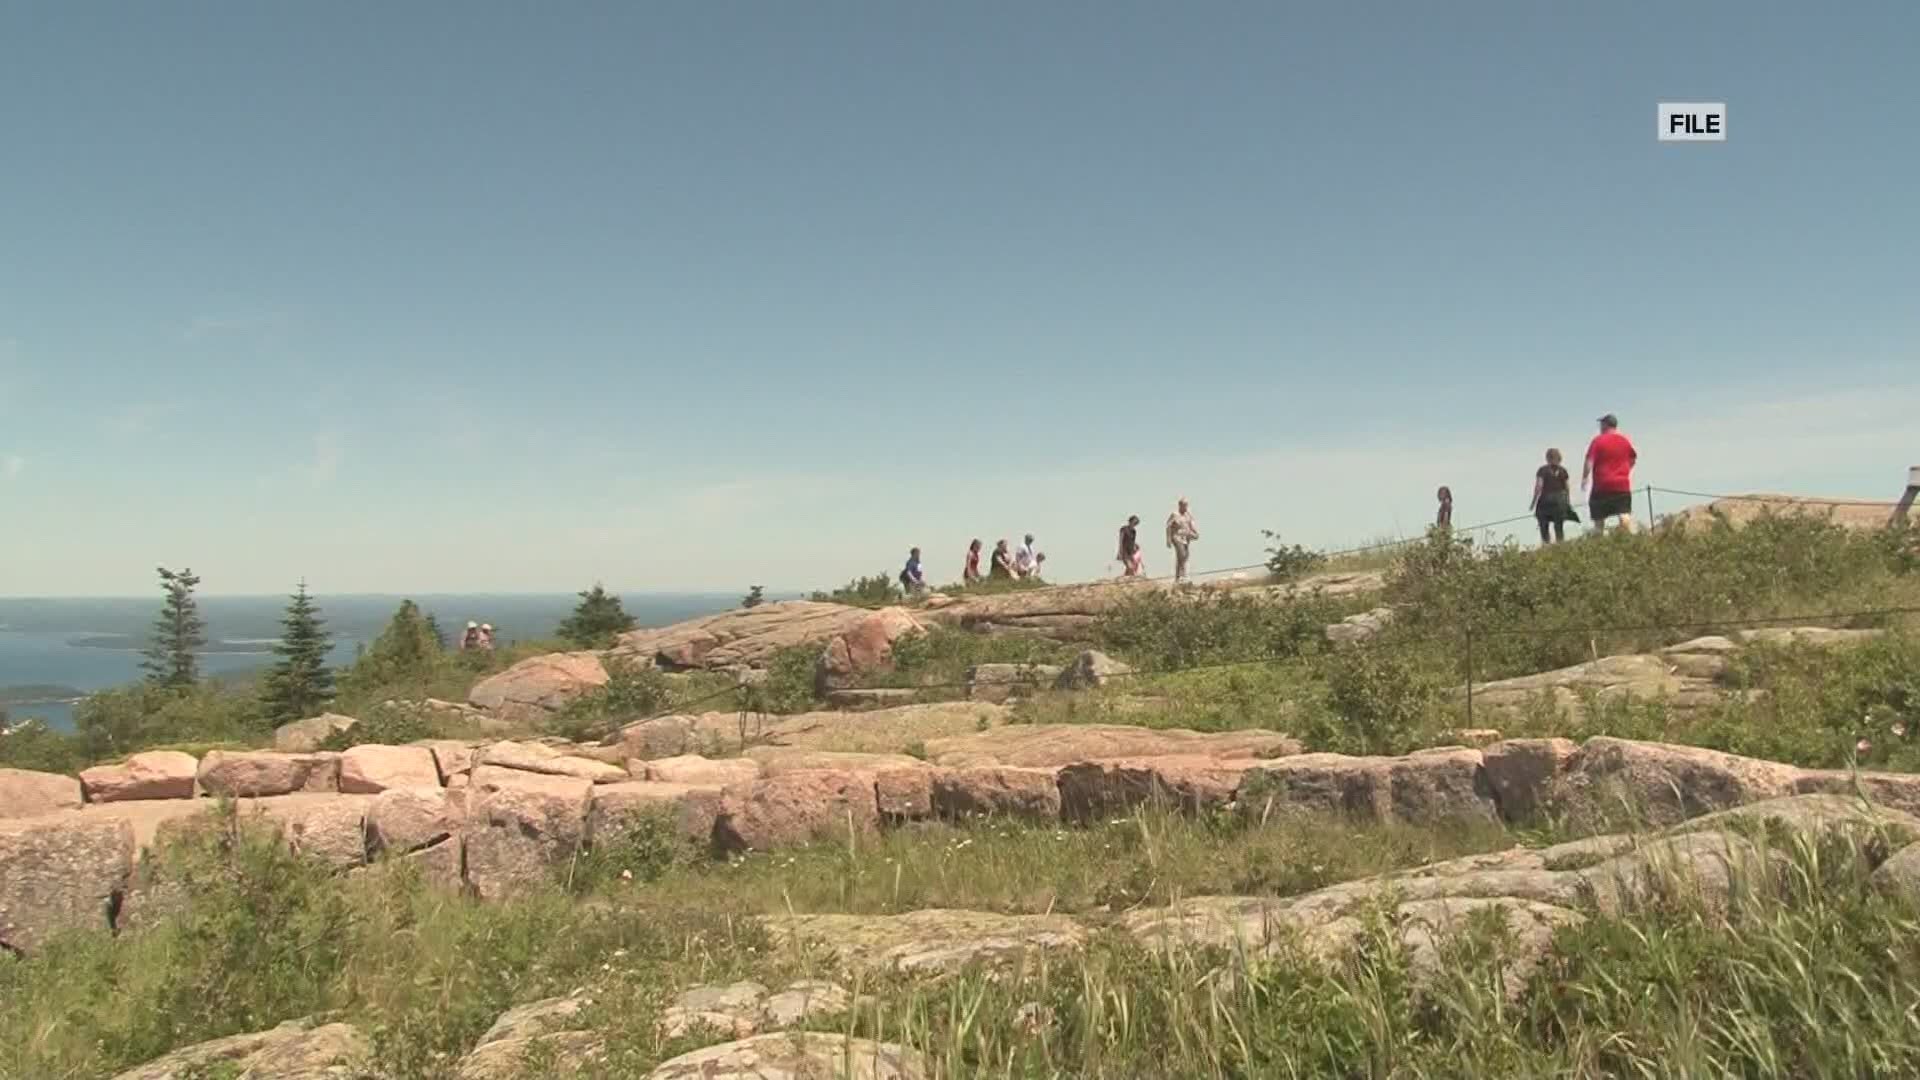 Summer may be coming, but Bar Harbor is urging visitors to stay home amid coronavirus